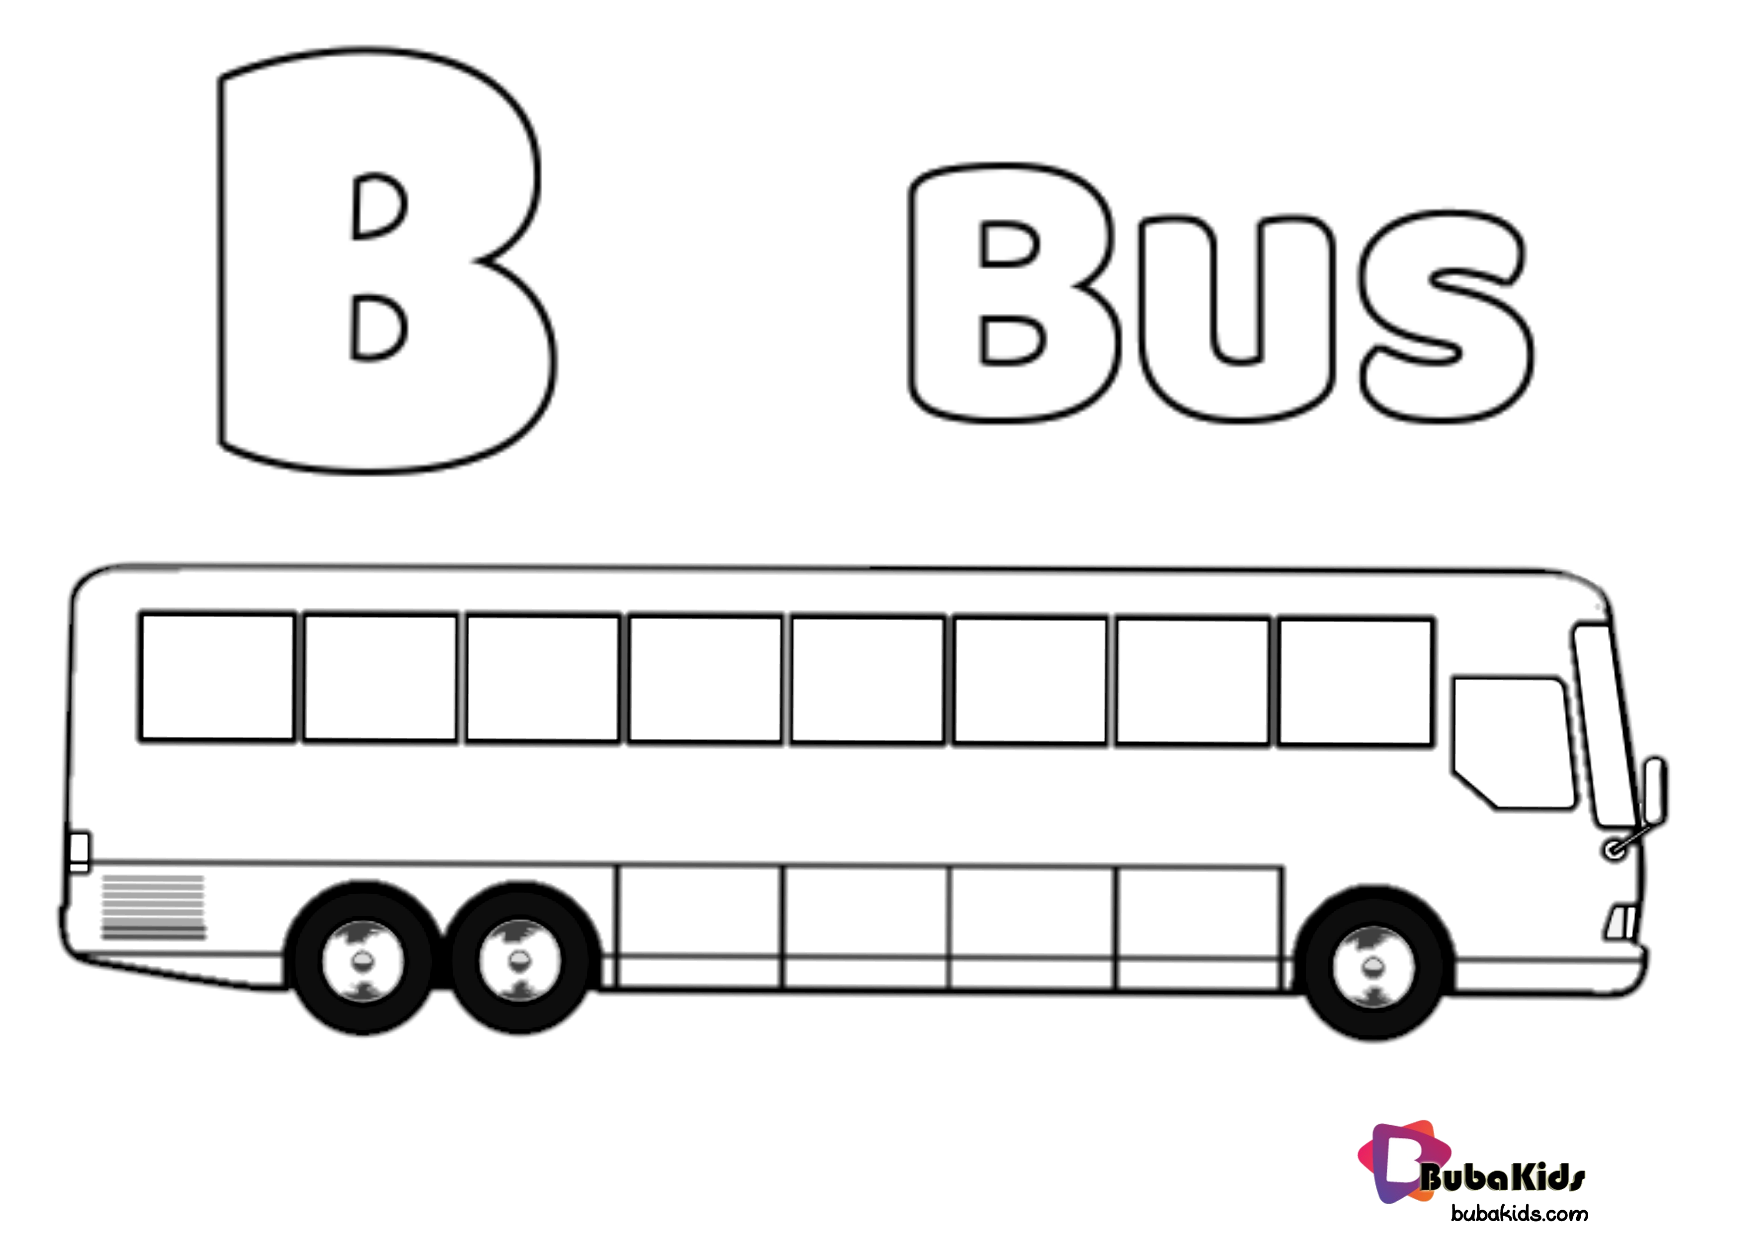 Alphabet B for Bus coloring page printable. Wallpaper